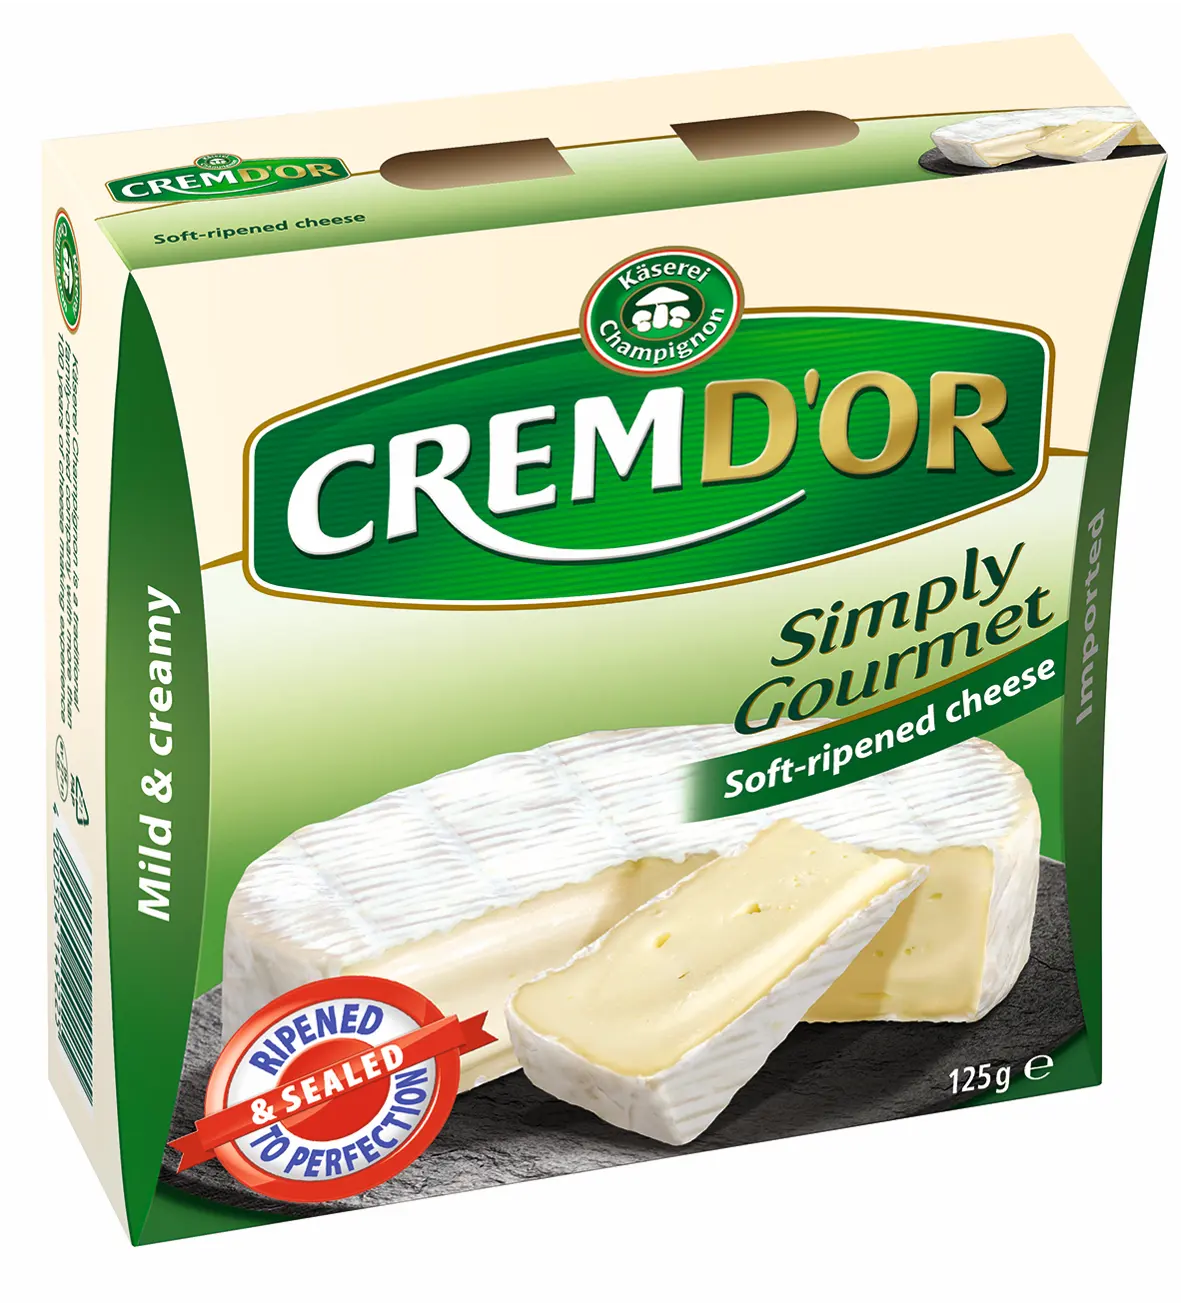 Worldwide Selling Best Quality Cremdor Camembert De Luxe Soft Ripened Cheese with Long Shelf Life